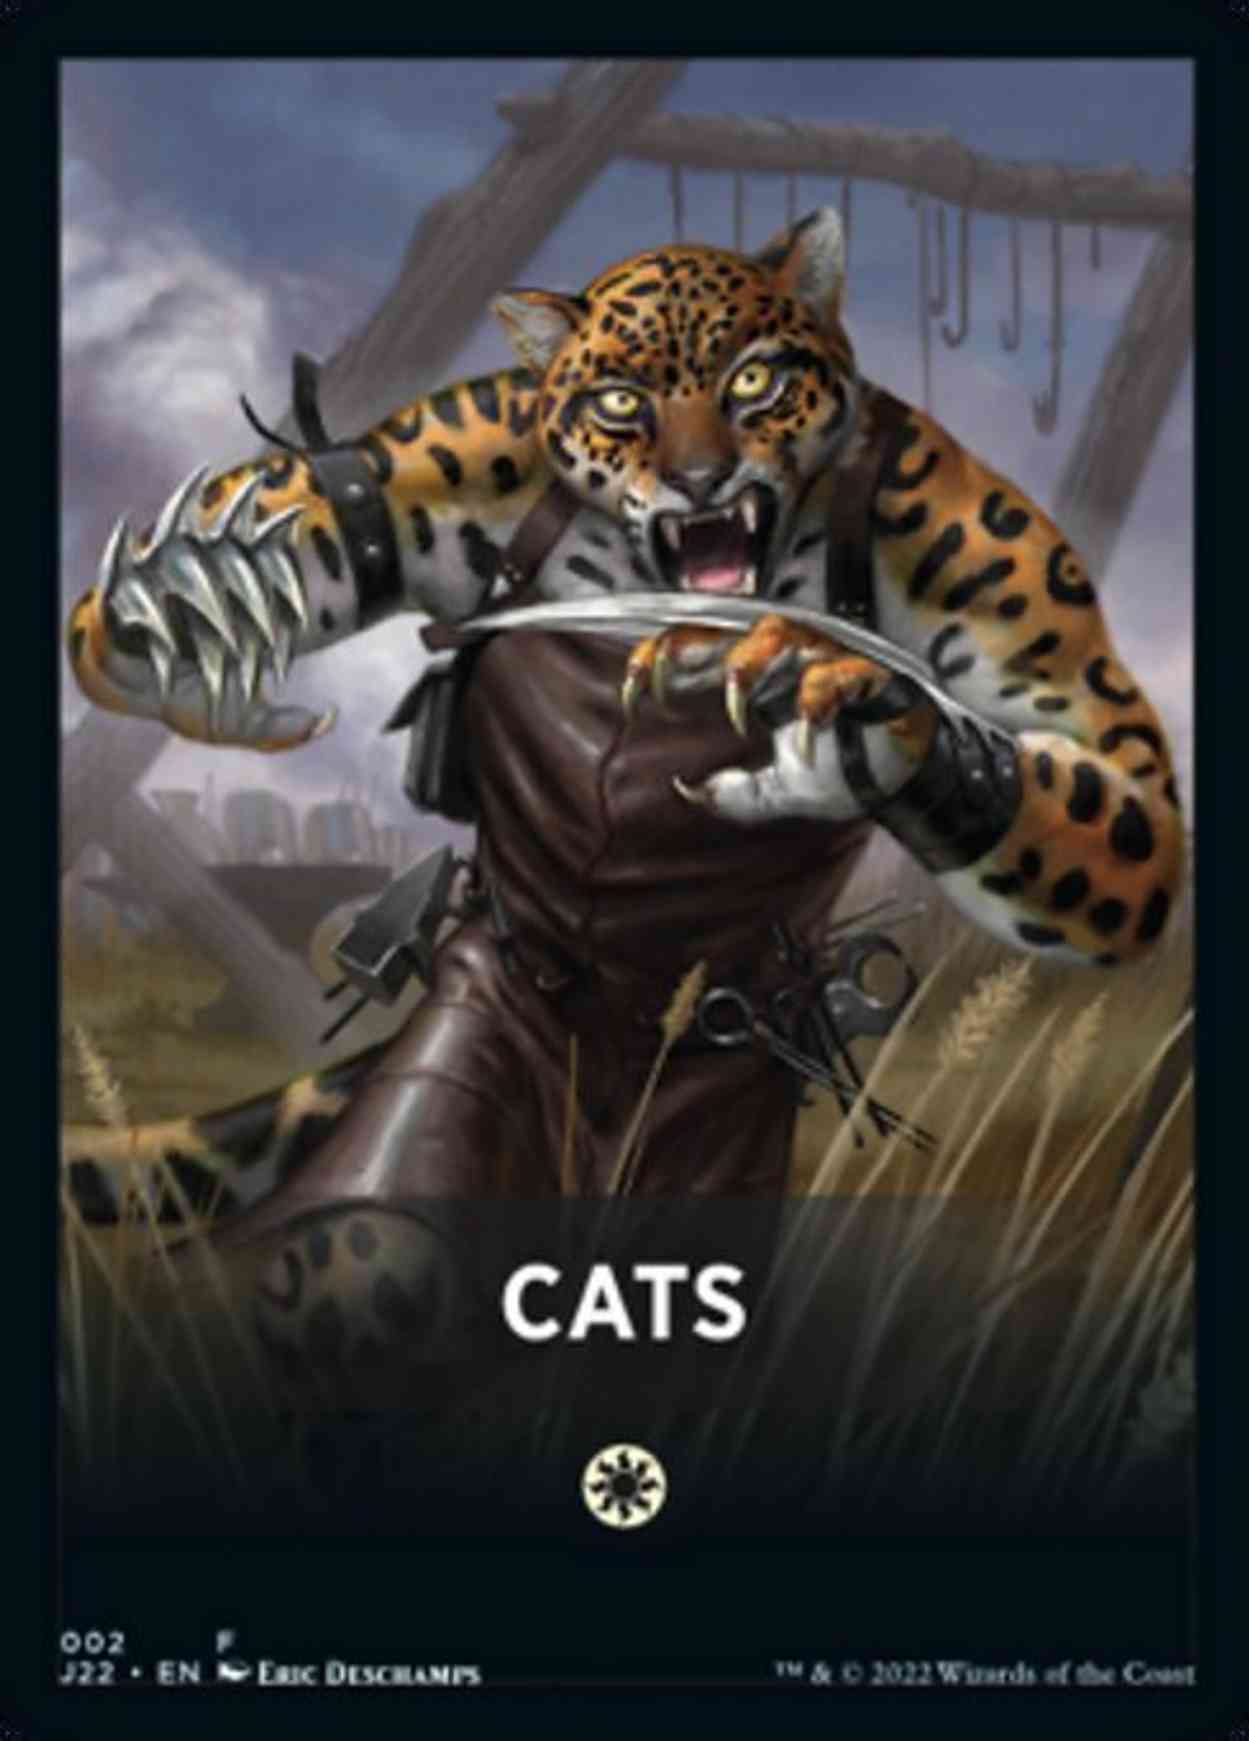 Cats Theme Card magic card front